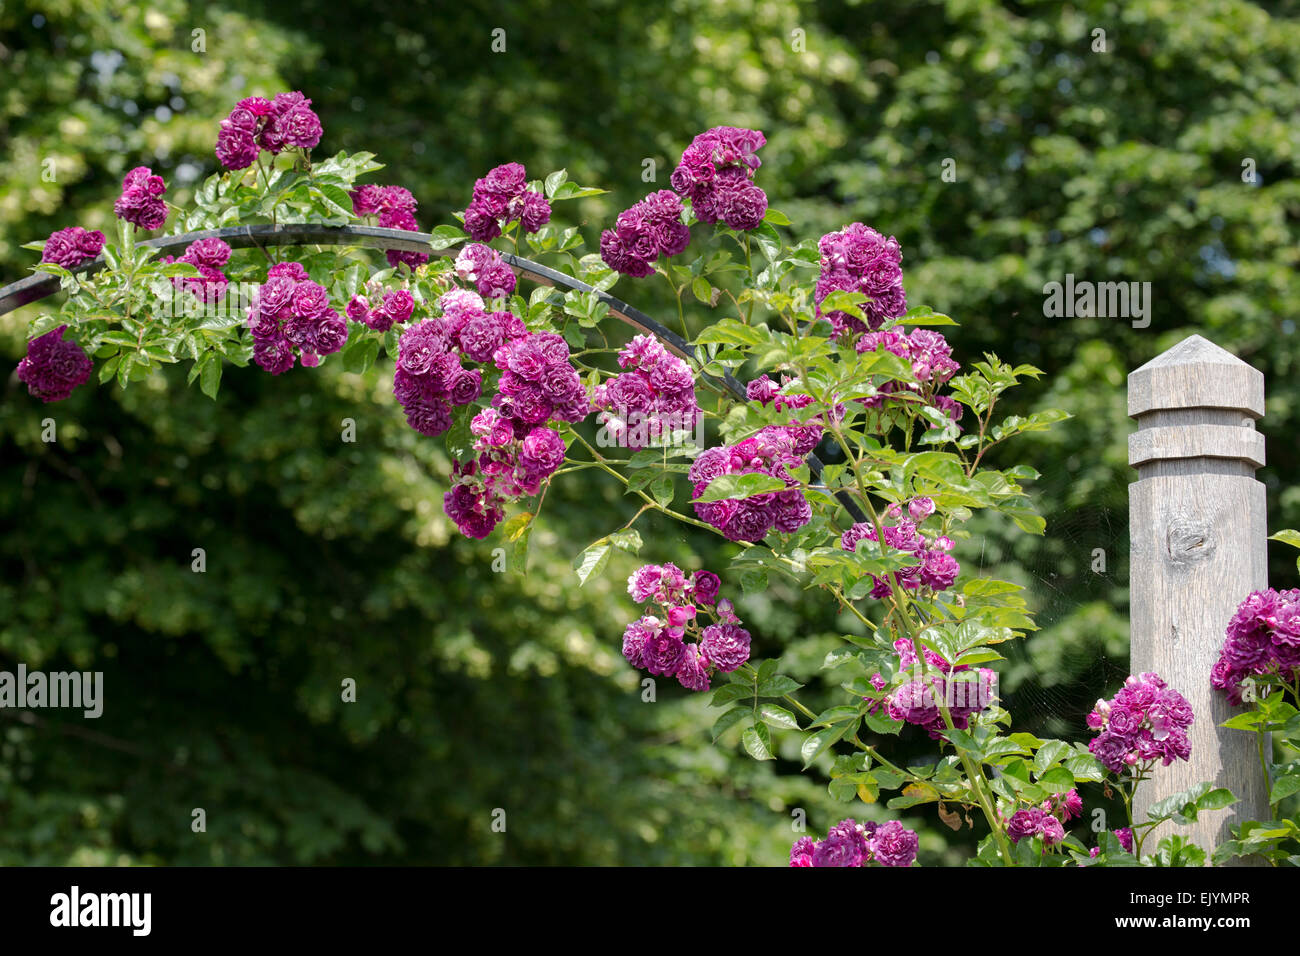 Magenta Rose High Resolution Stock Photography and Images - Alamy